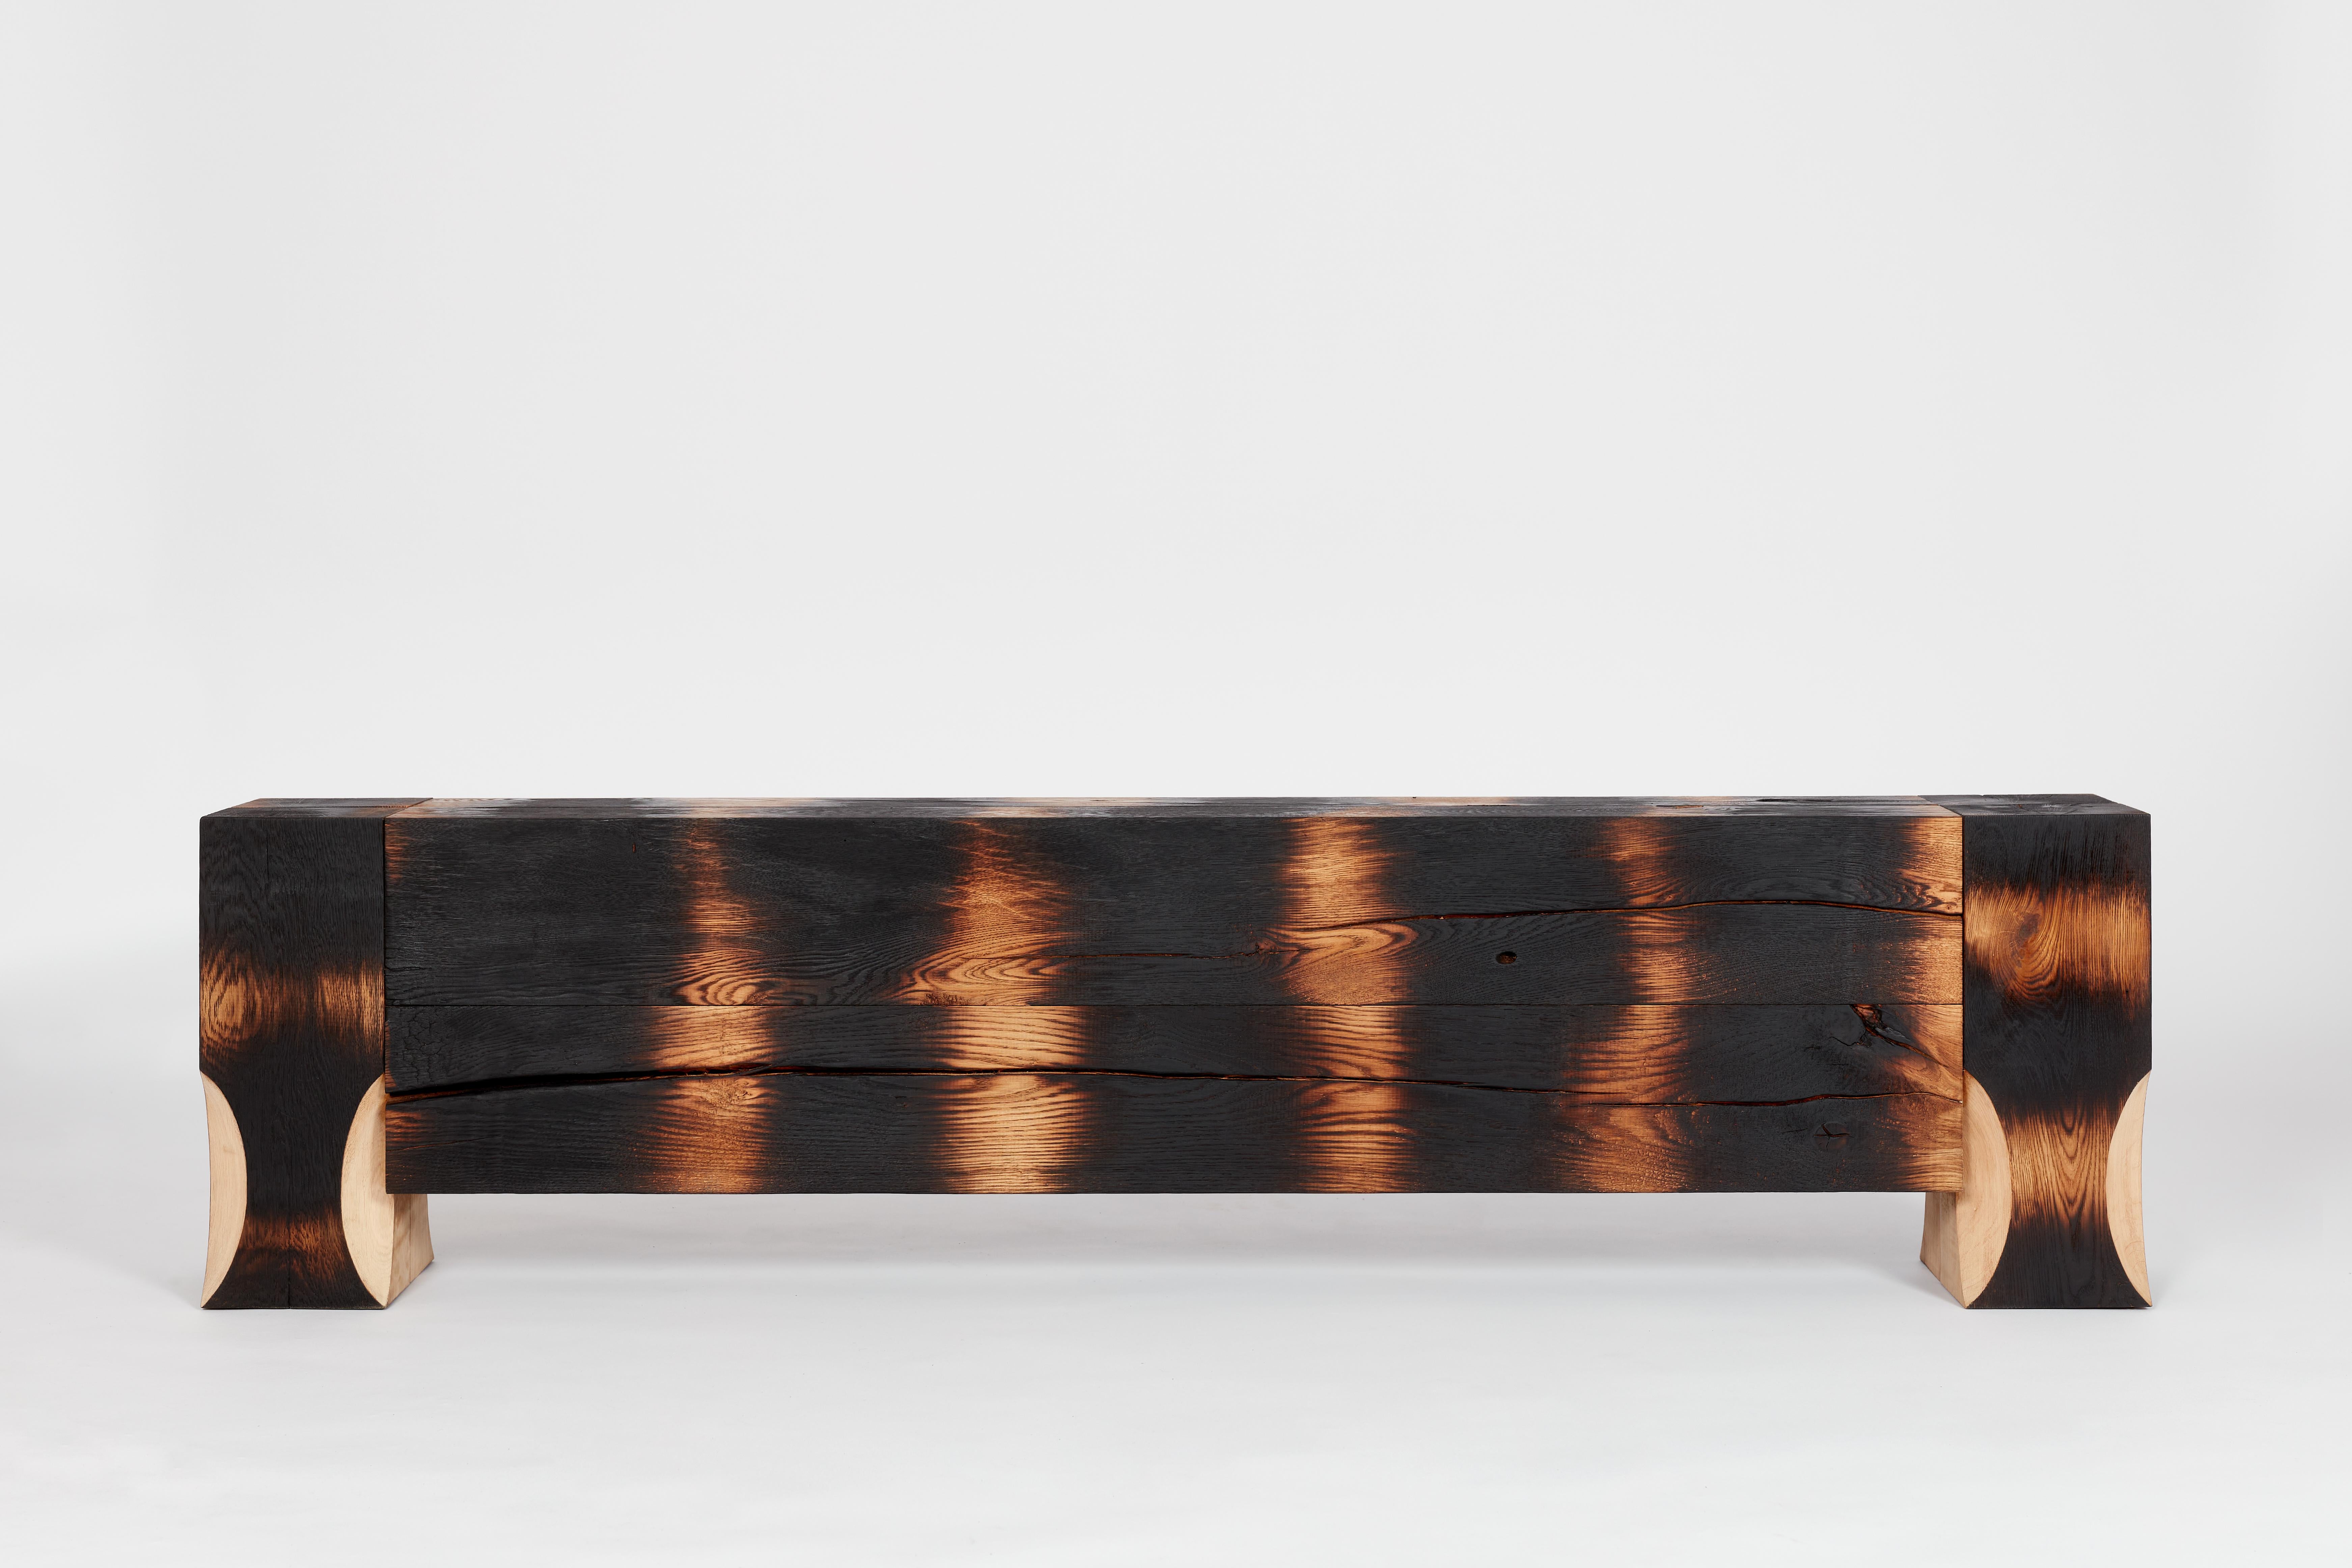 This object is crafted with precision, combining traditional wood burning techniques with the use of solid oak beams. To preserve the intricate wooden pattern and protect it from damage, a meticulous application of seven layers of tung oil is